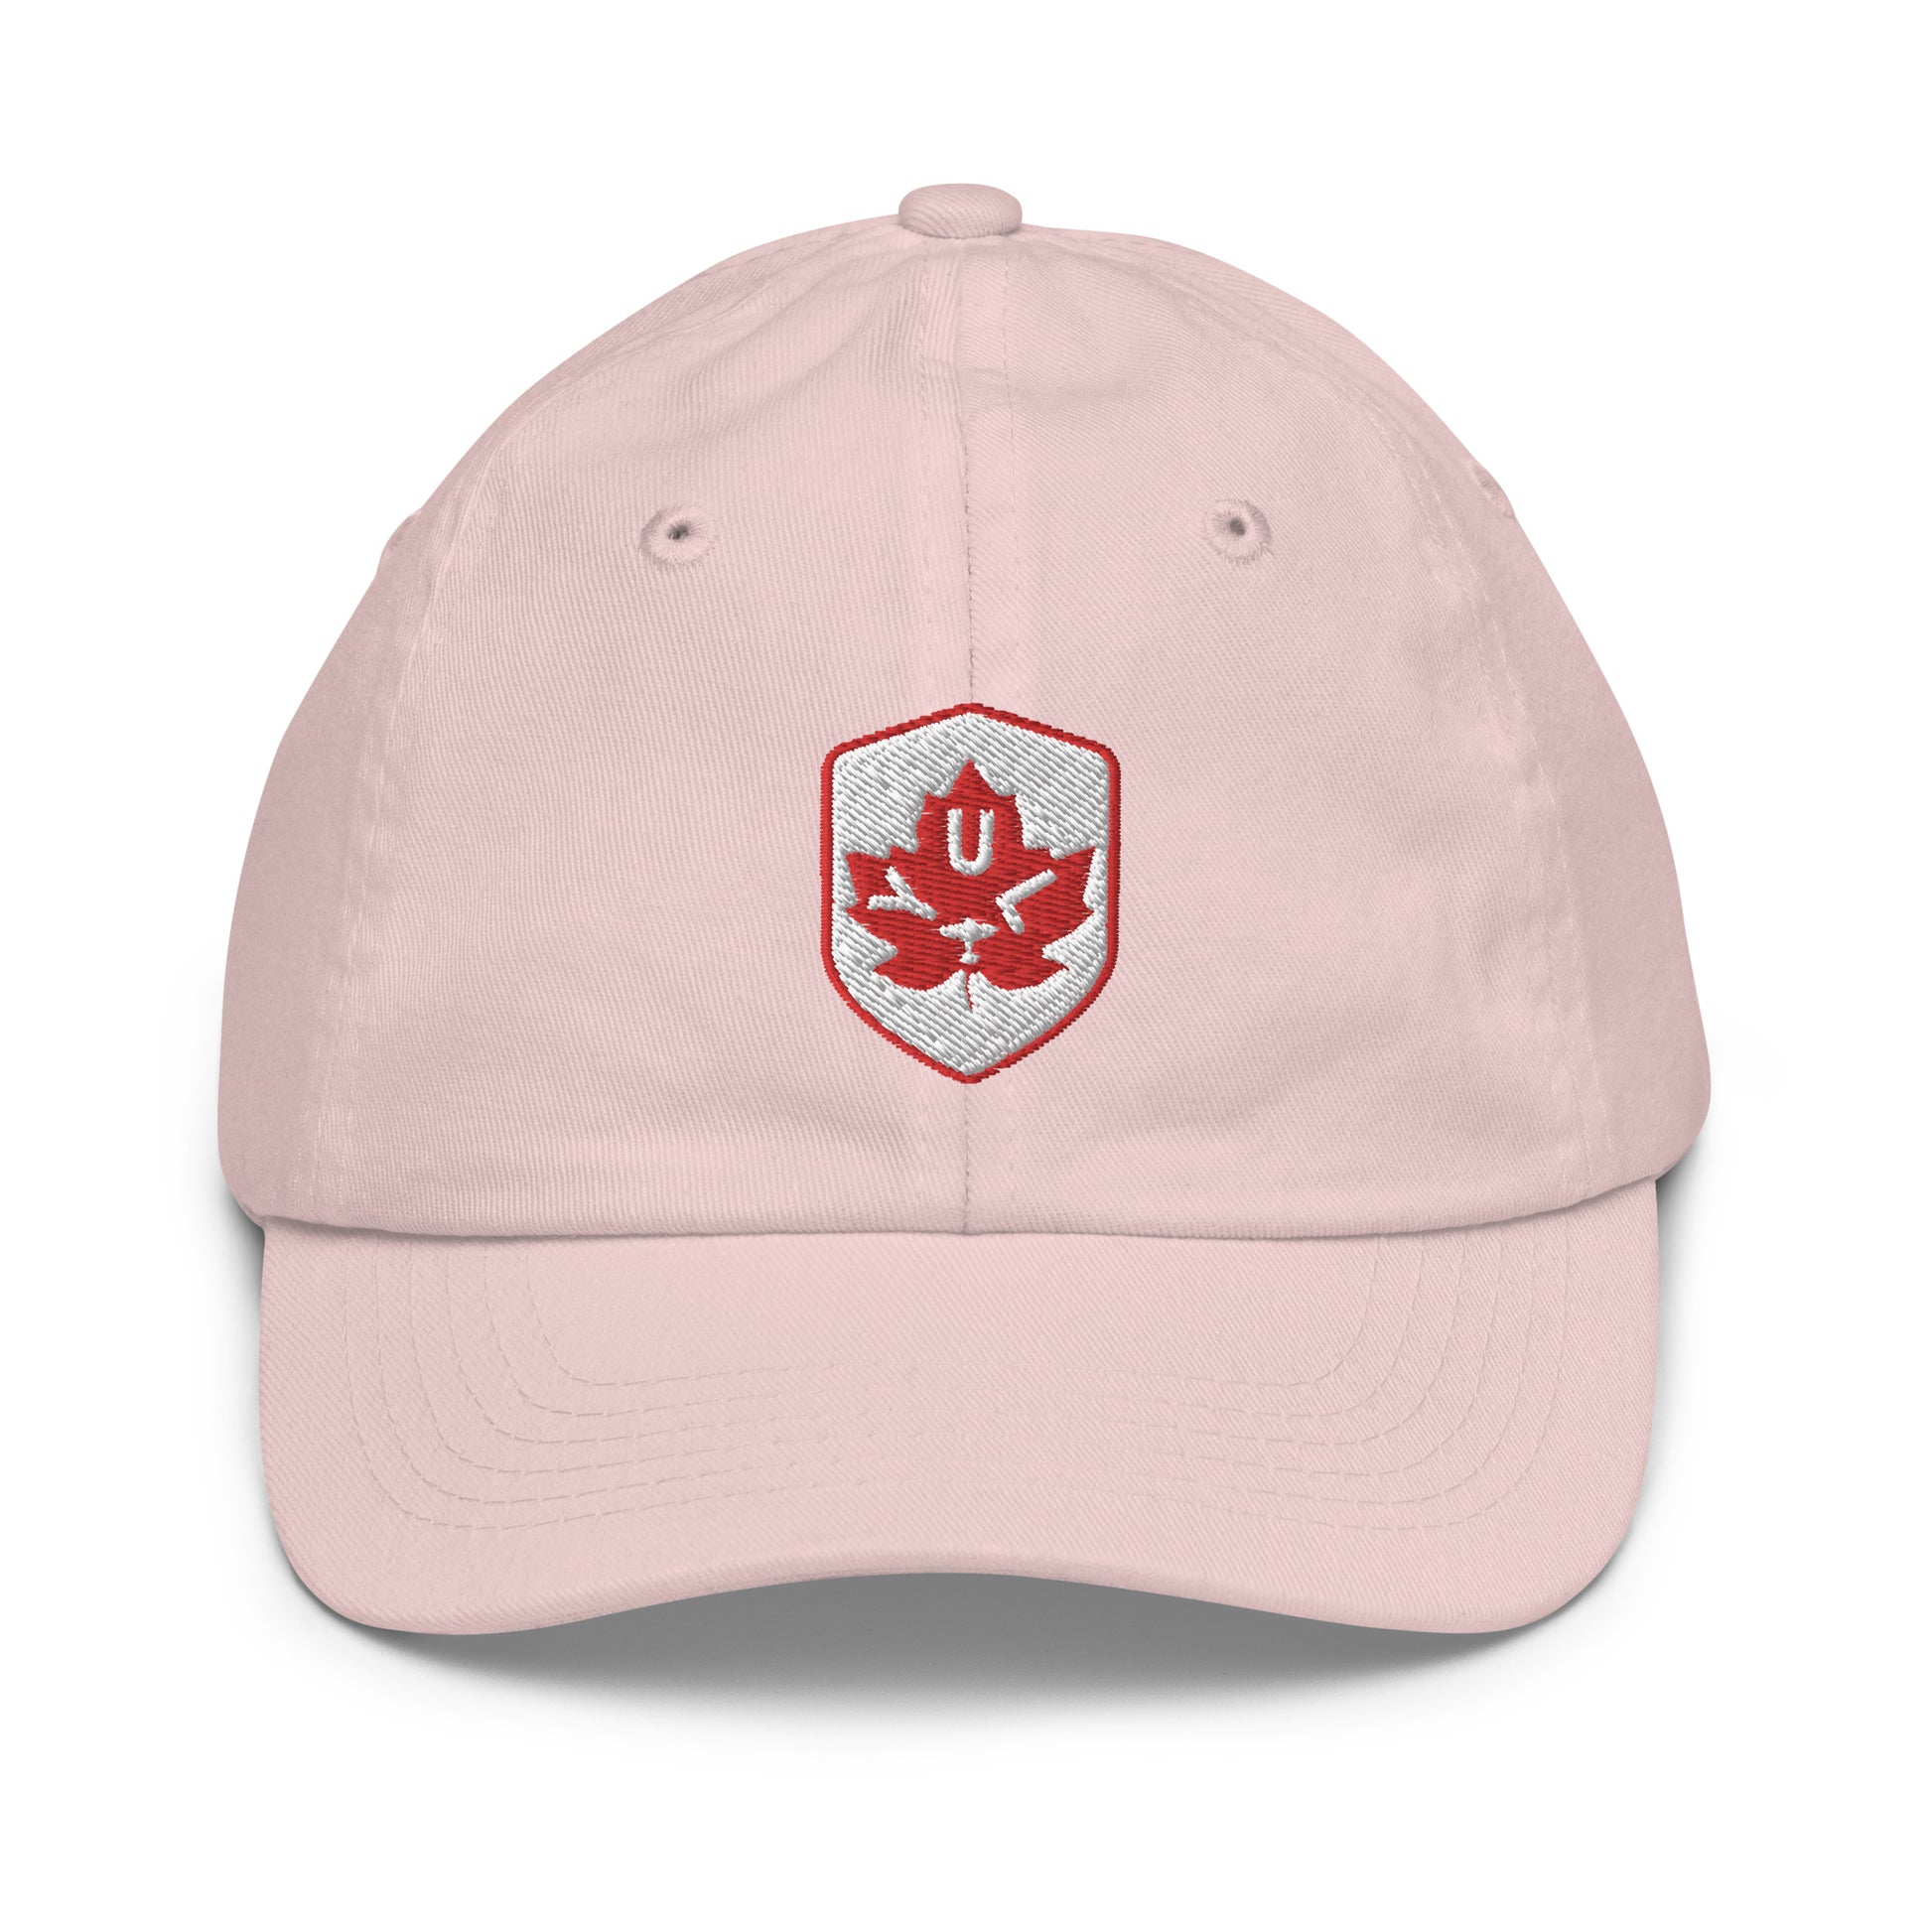 Maple Leaf Kid's Cap - Red/White • YUL Montreal • YHM Designs - Image 24